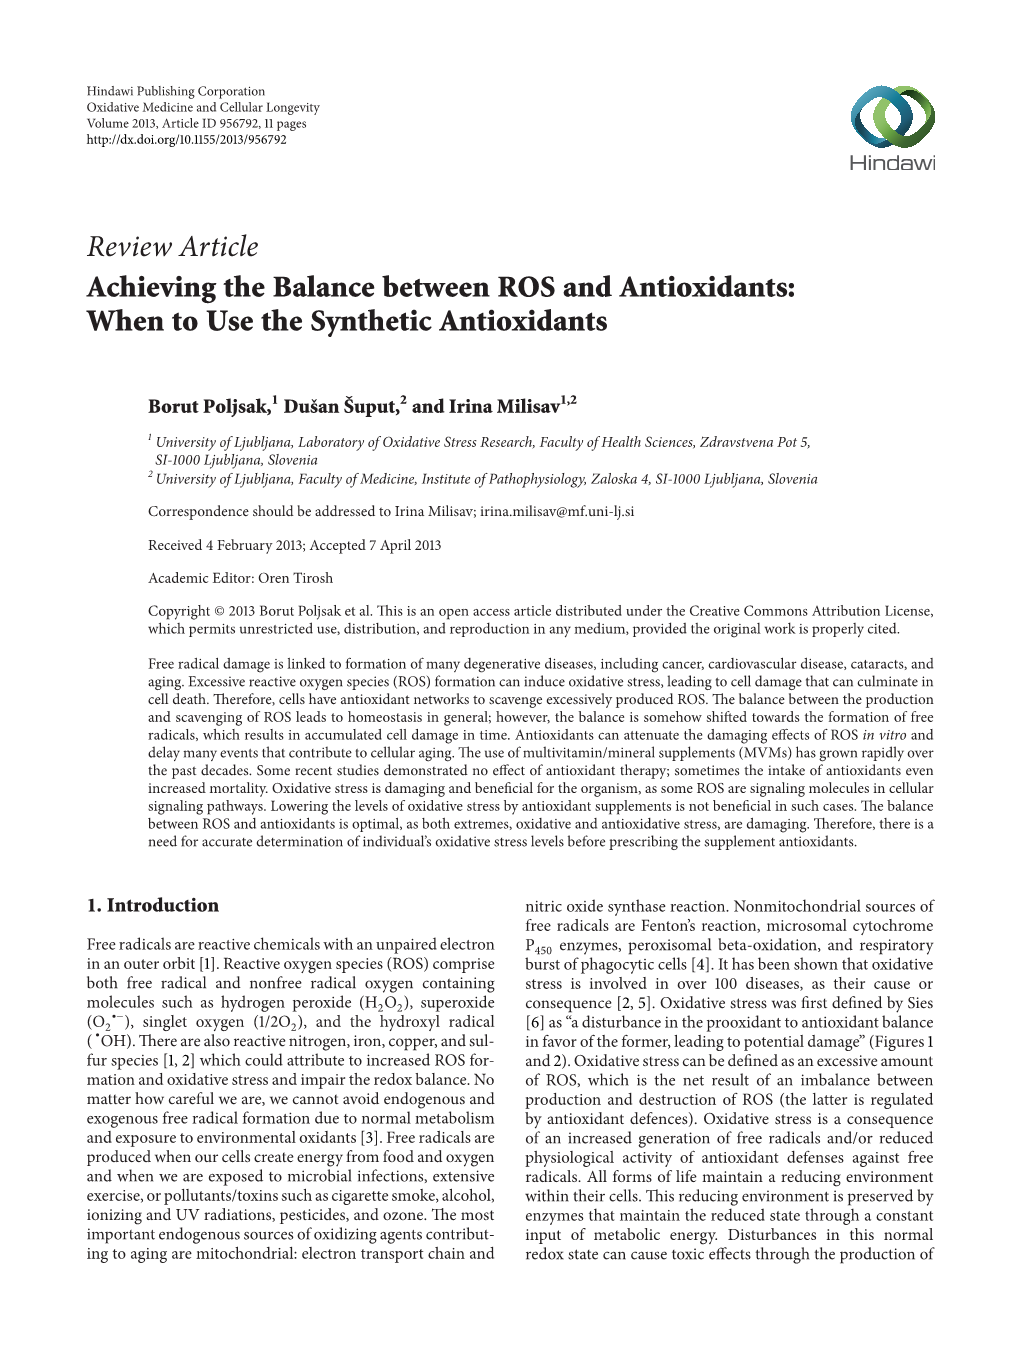 Review Article Achieving the Balance Between ROS and Antioxidants: When to Use the Synthetic Antioxidants